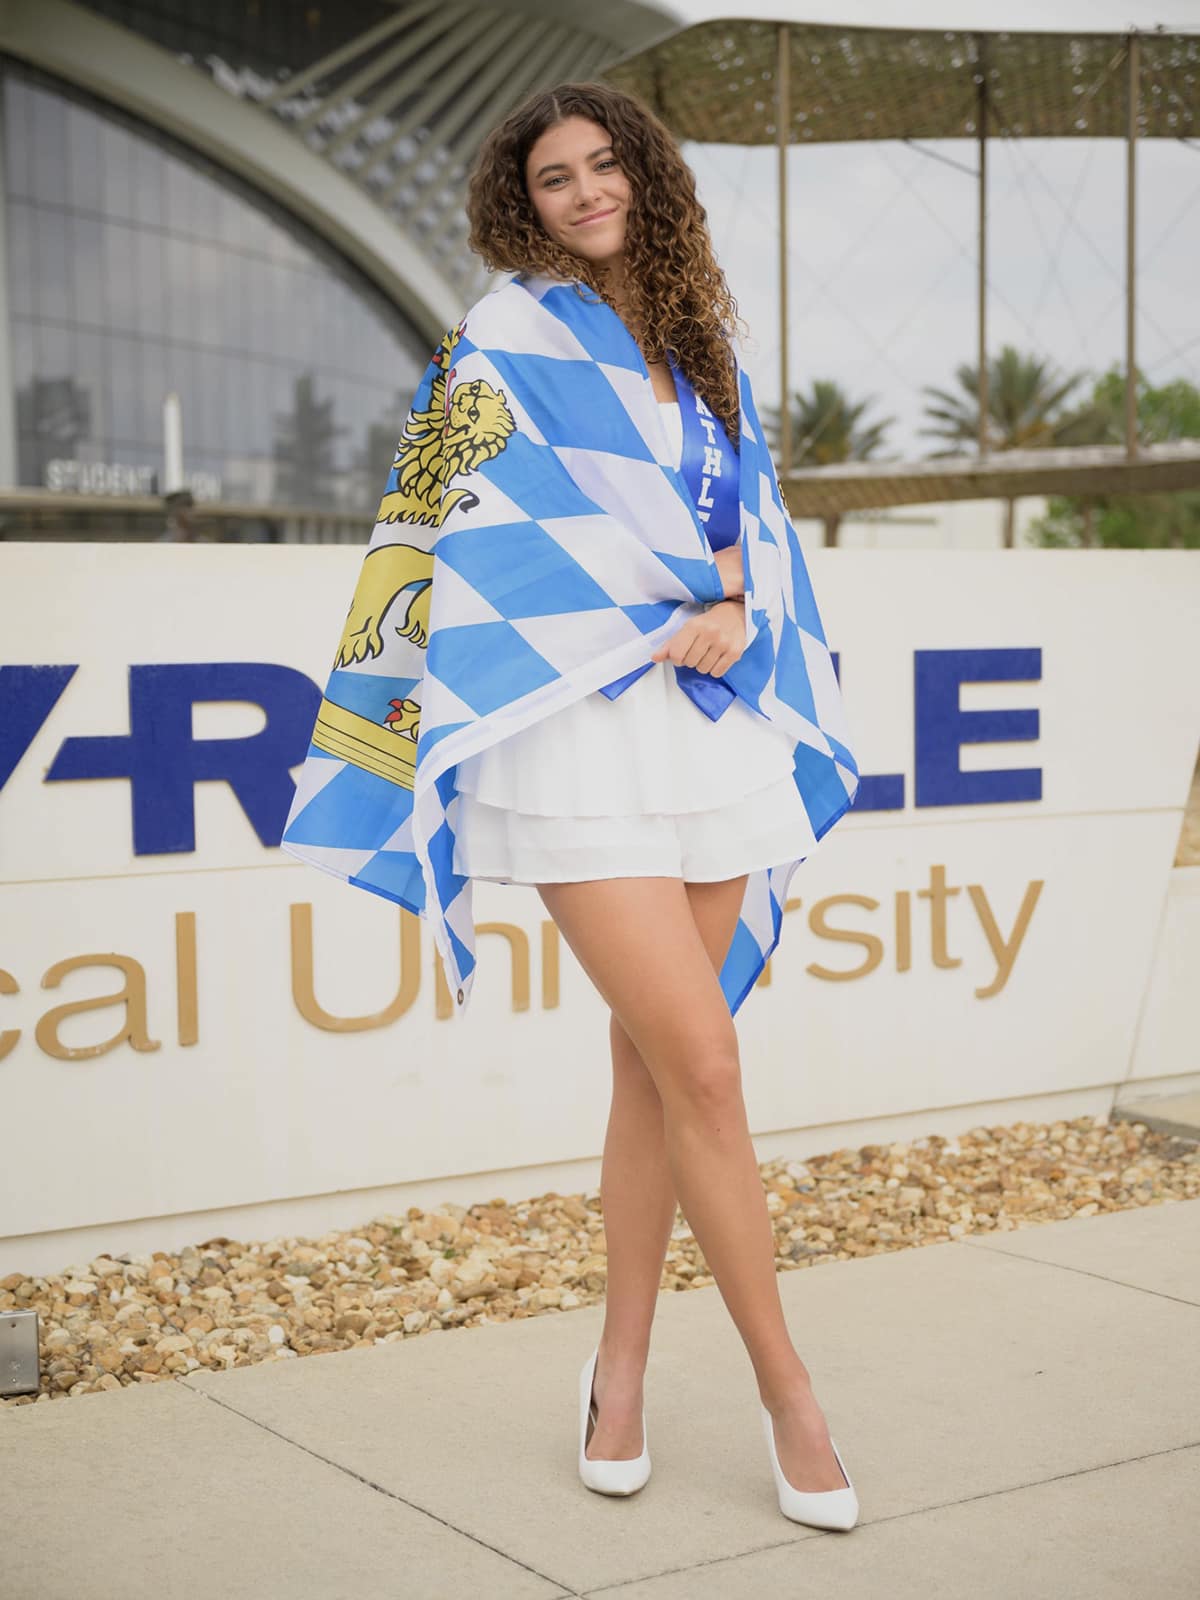 Shown here in front of the Mori Hosseini Student Union, Julia Mautner wraps herself in the flag of her native Bavaria.